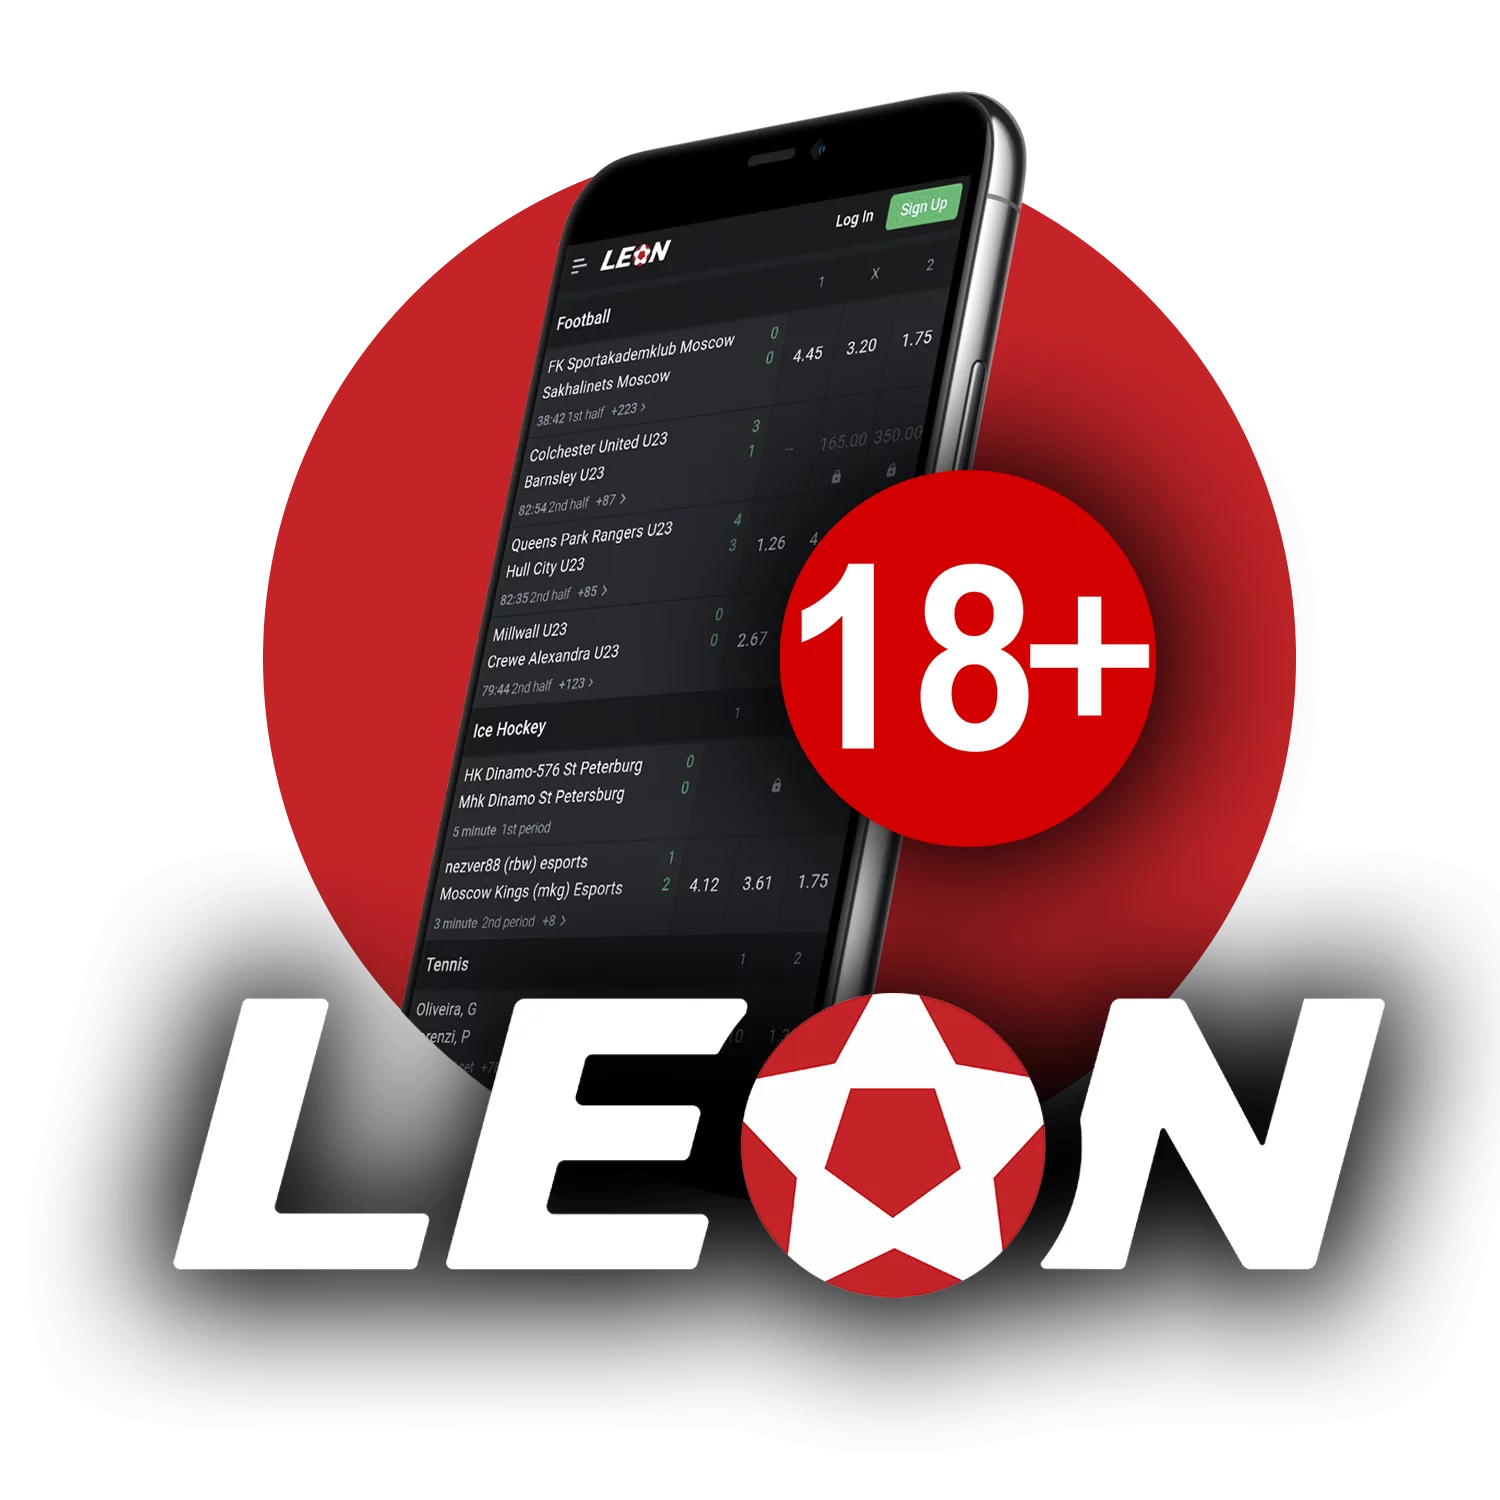 One need to be at the age of above 18 to register and bet on money in Leon.